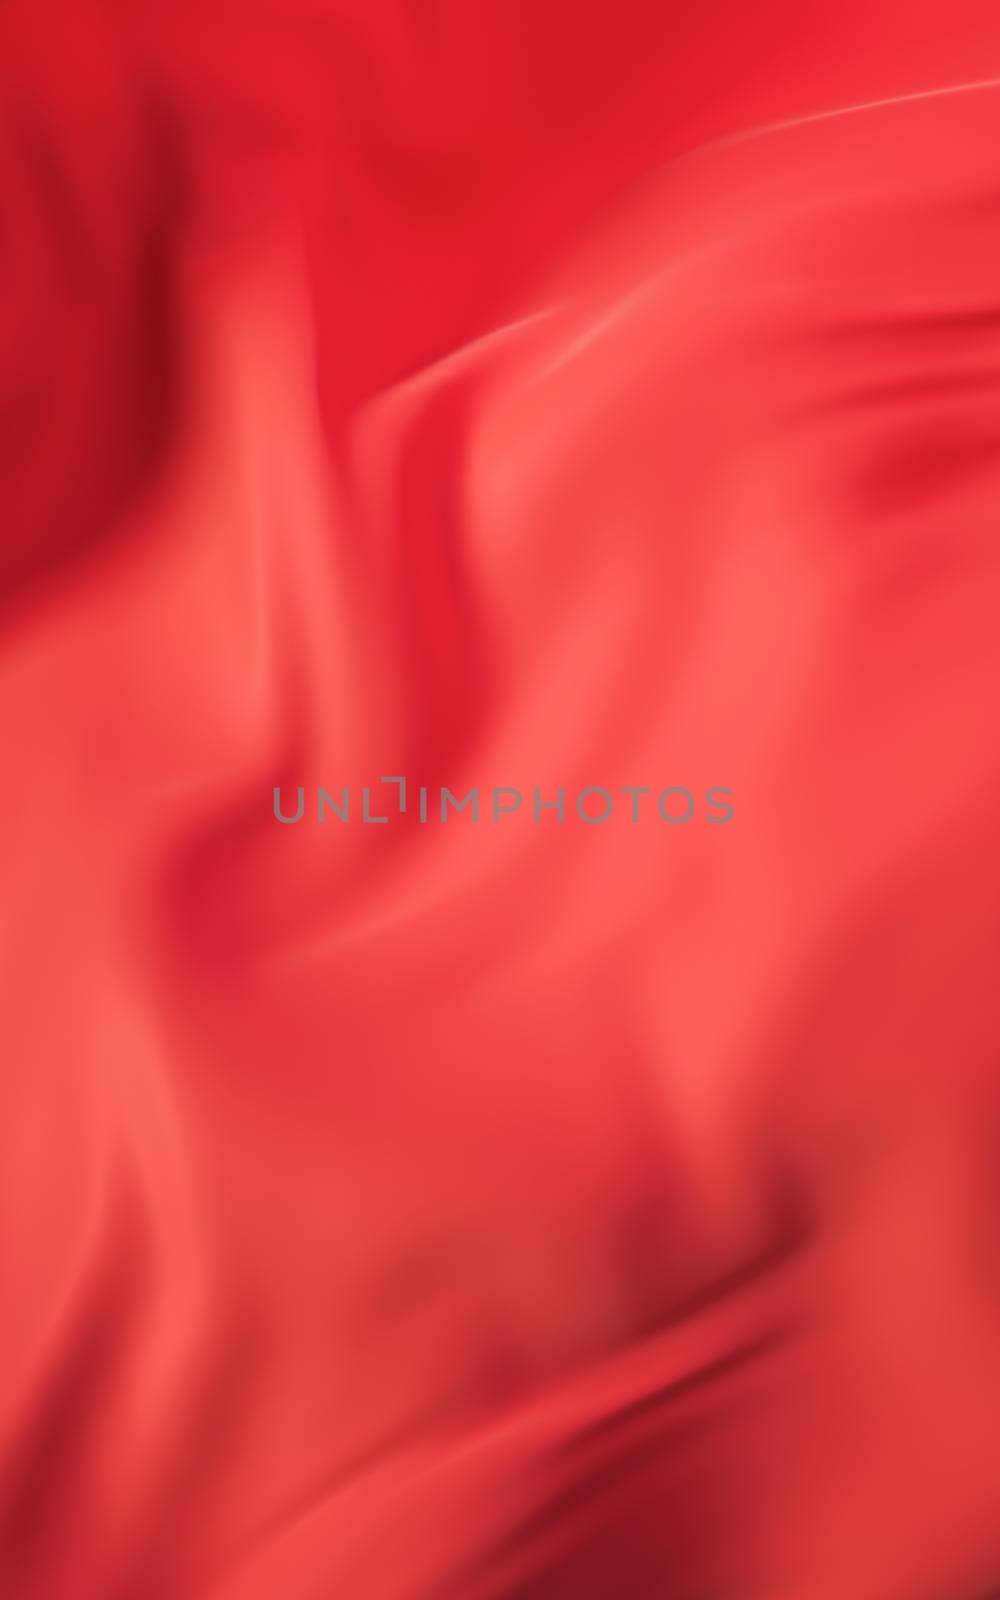 Flowing red cloth background, 3d rendering. Computer digital drawing.